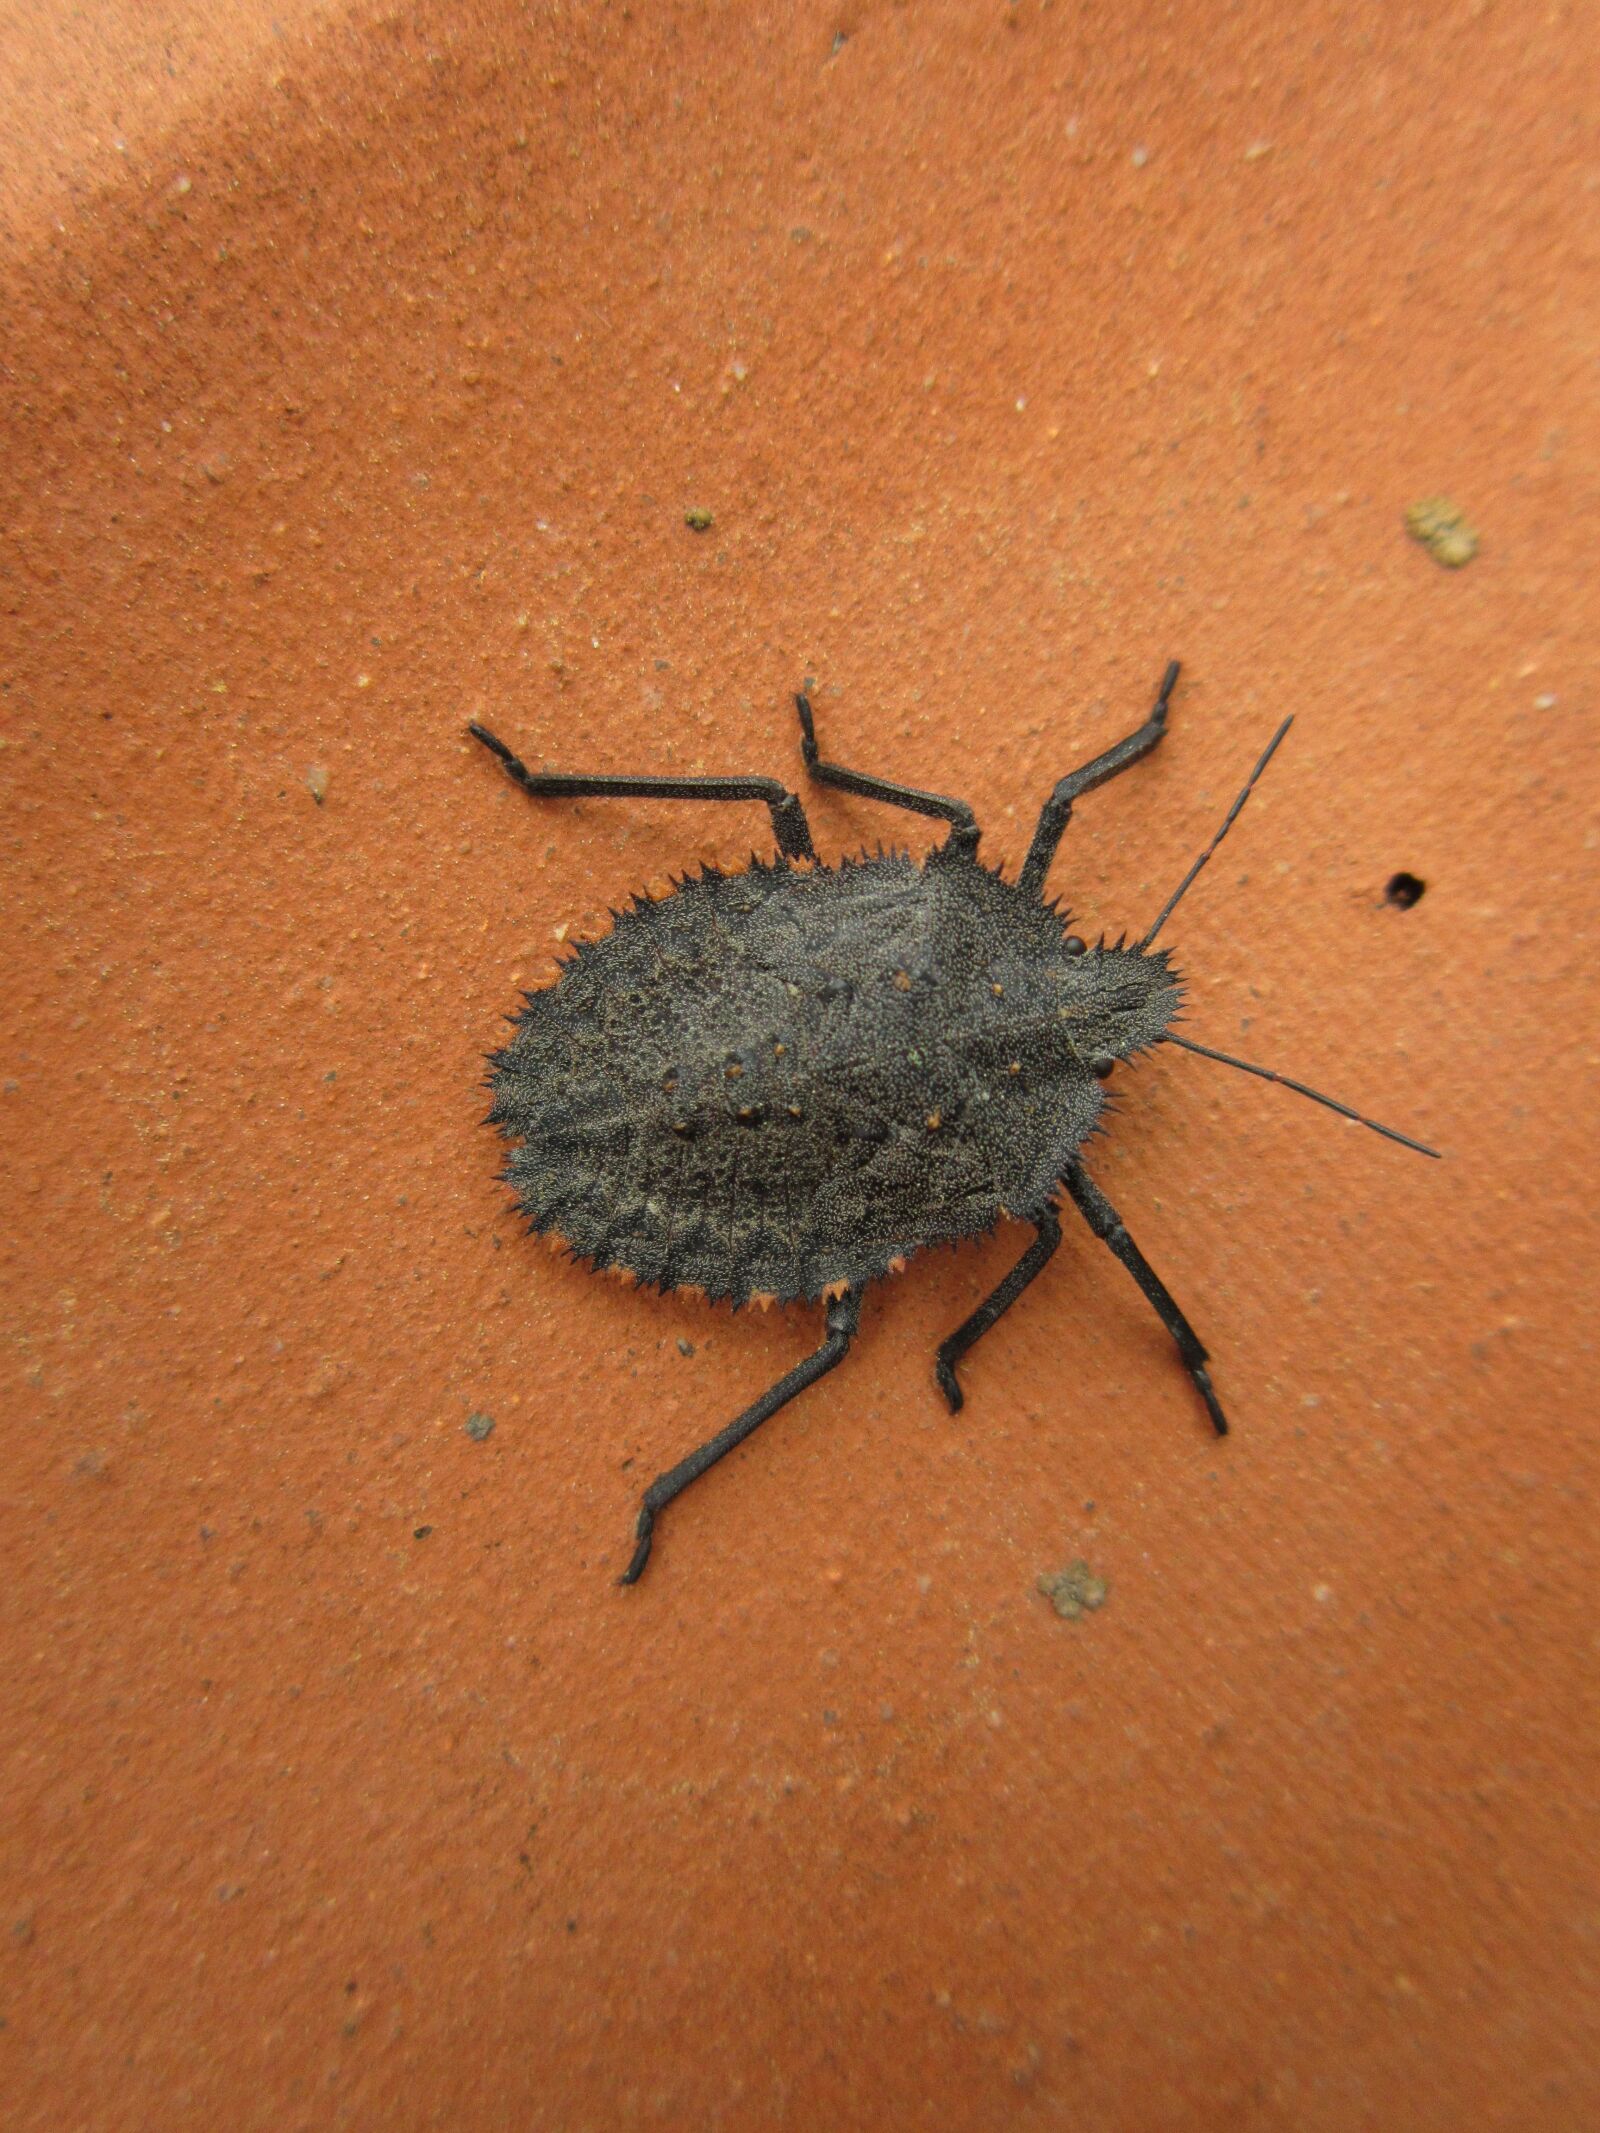 Canon PowerShot A3300 IS sample photo. Mustha spinosula, stink bug photography